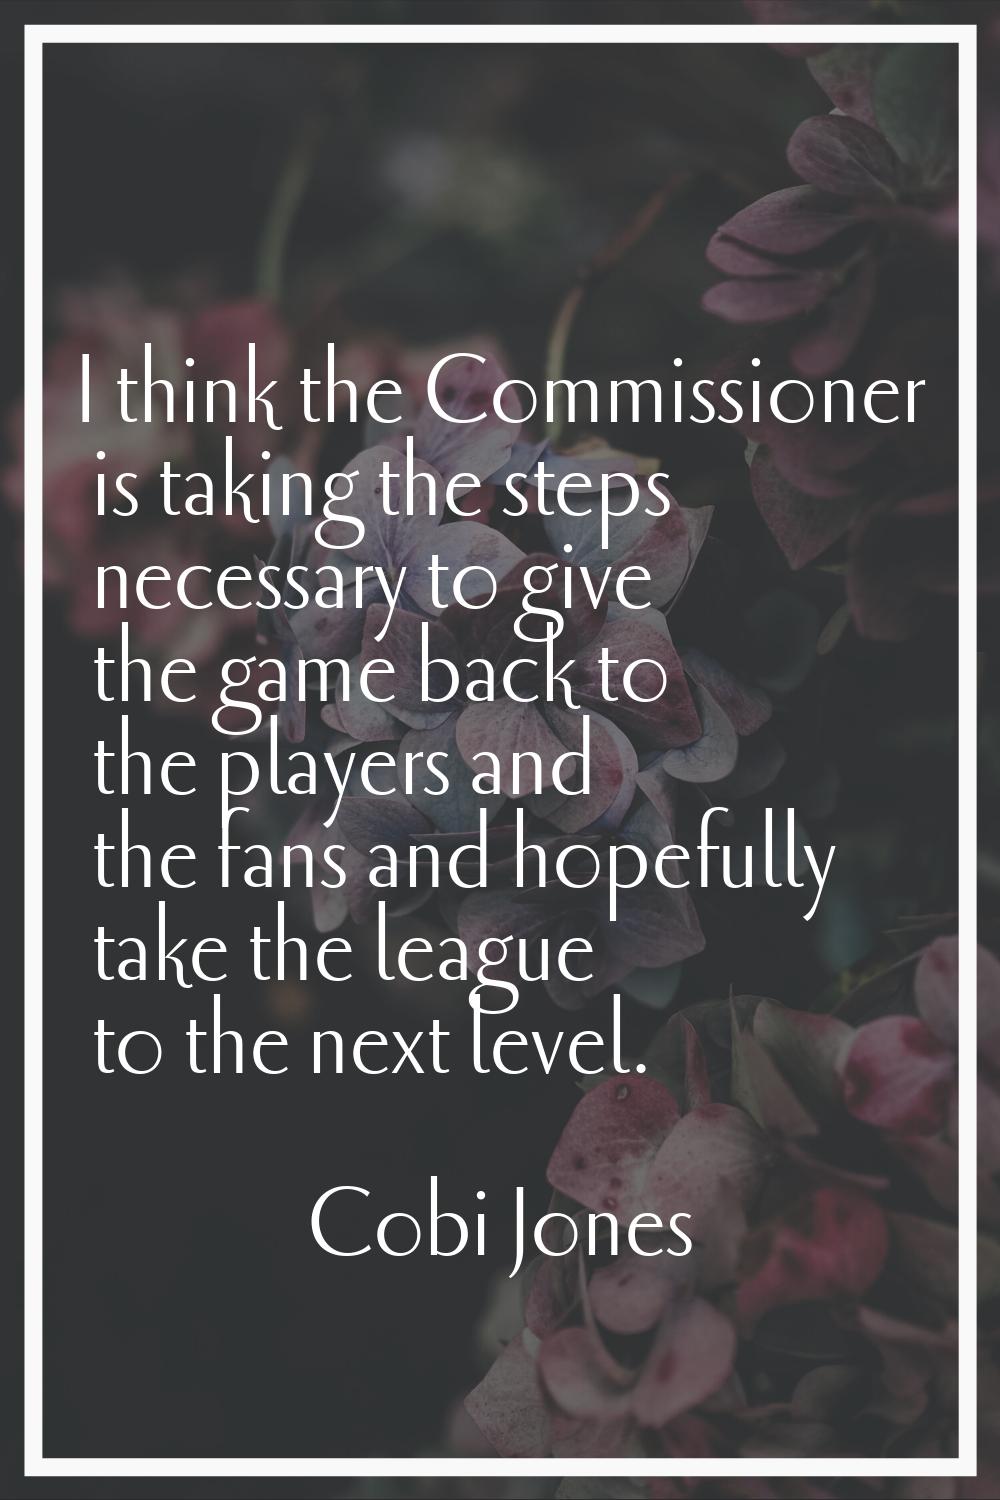 I think the Commissioner is taking the steps necessary to give the game back to the players and the